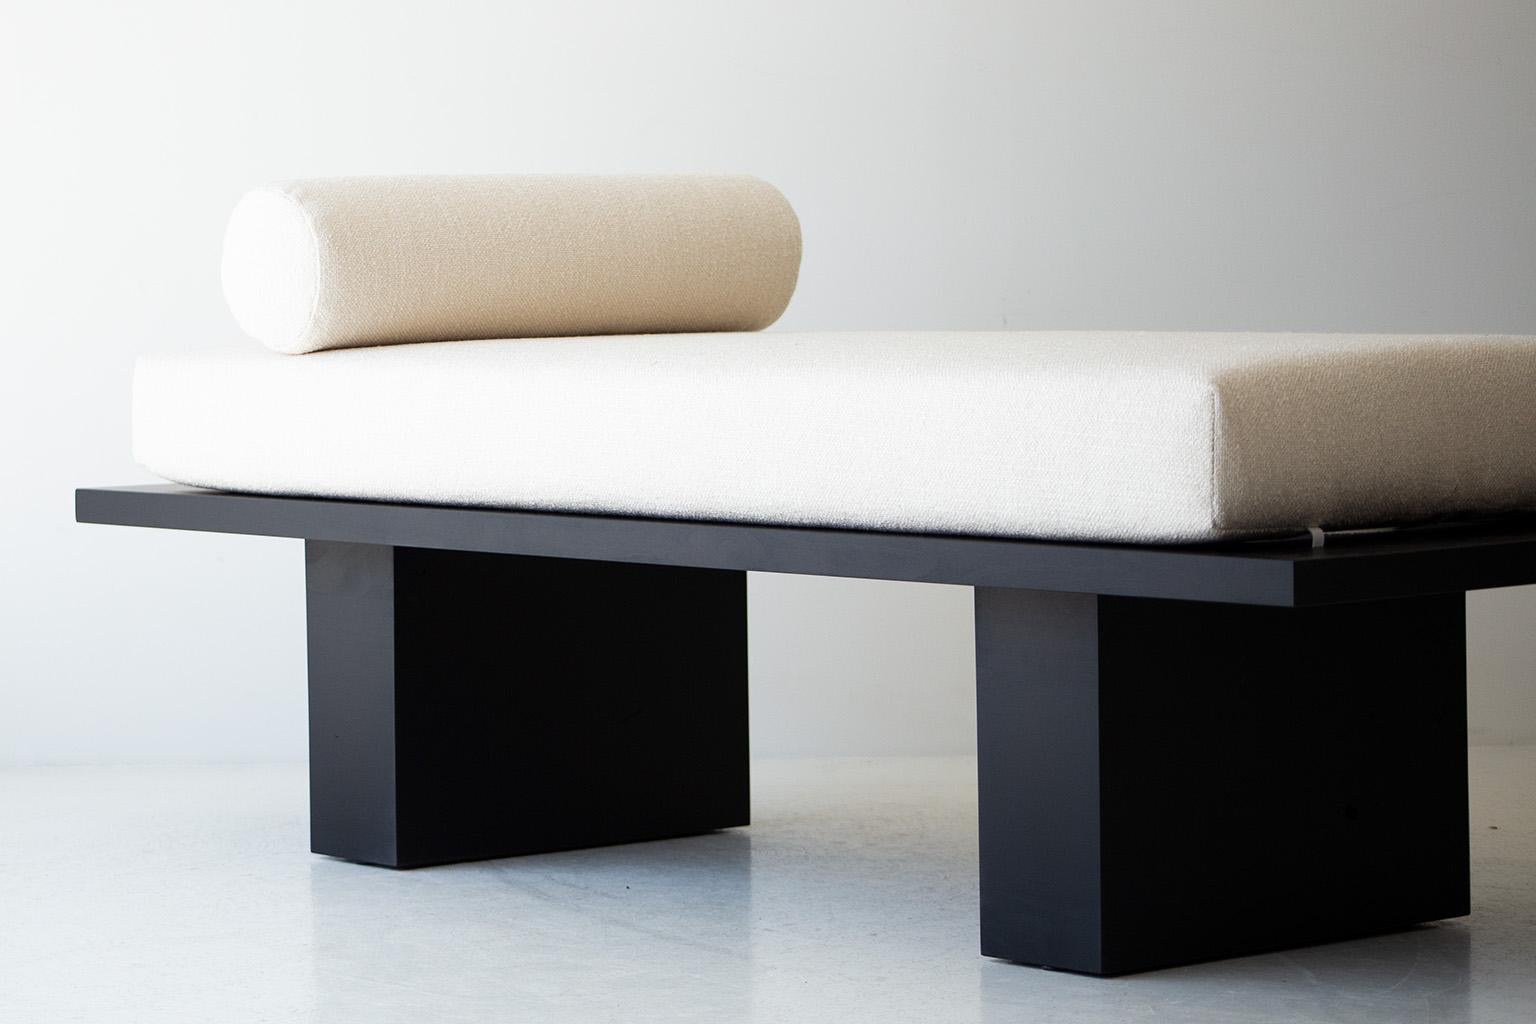 American Bertu Benches, Suelo Modern Bench, Lumbar Pillows, Upholstered, White, Black For Sale